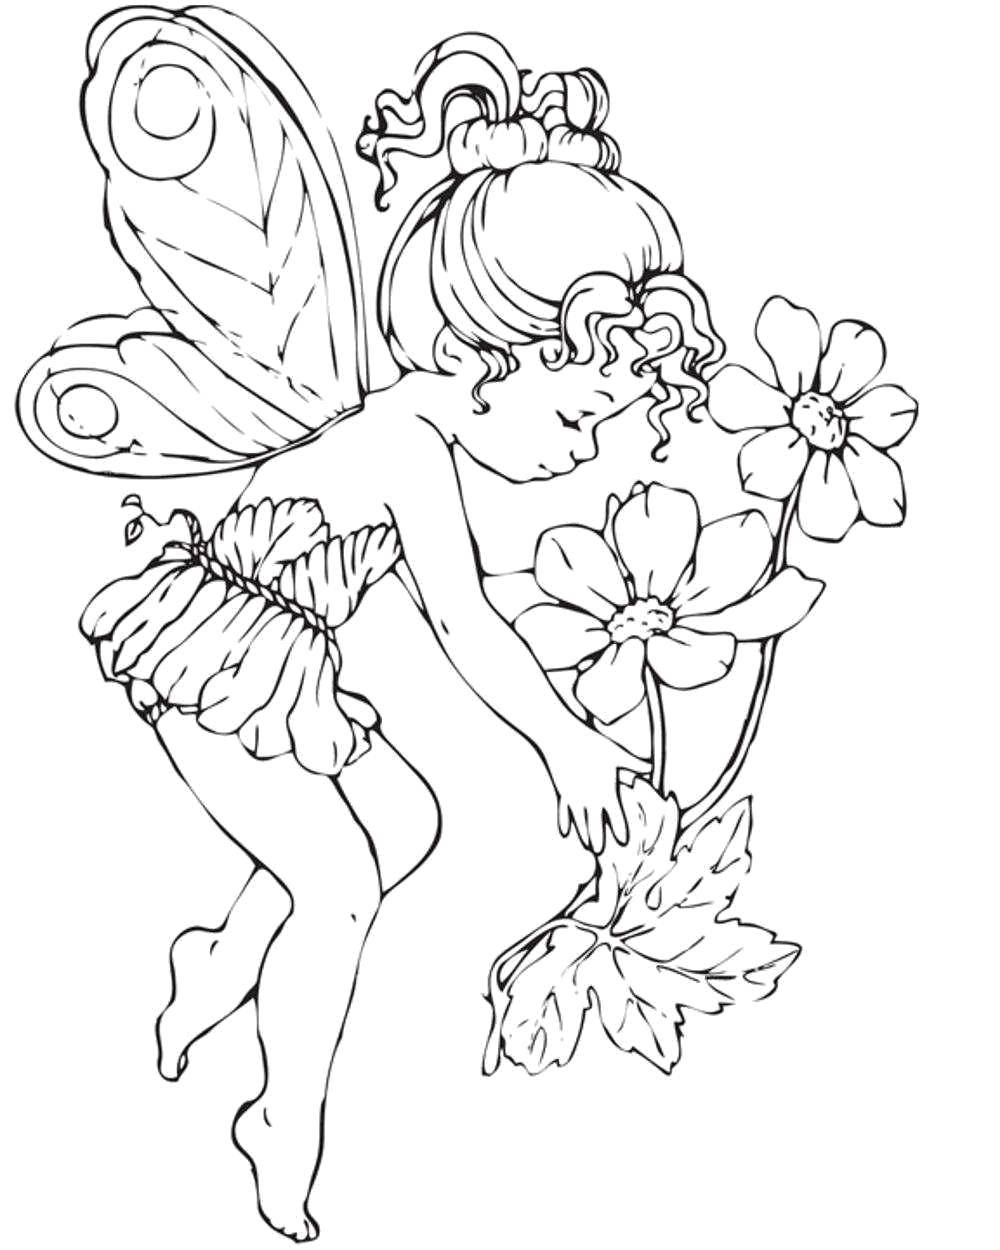 Coloring Fairy and flowers. Category fairy. Tags:  Fairy, forest, fairy tale.